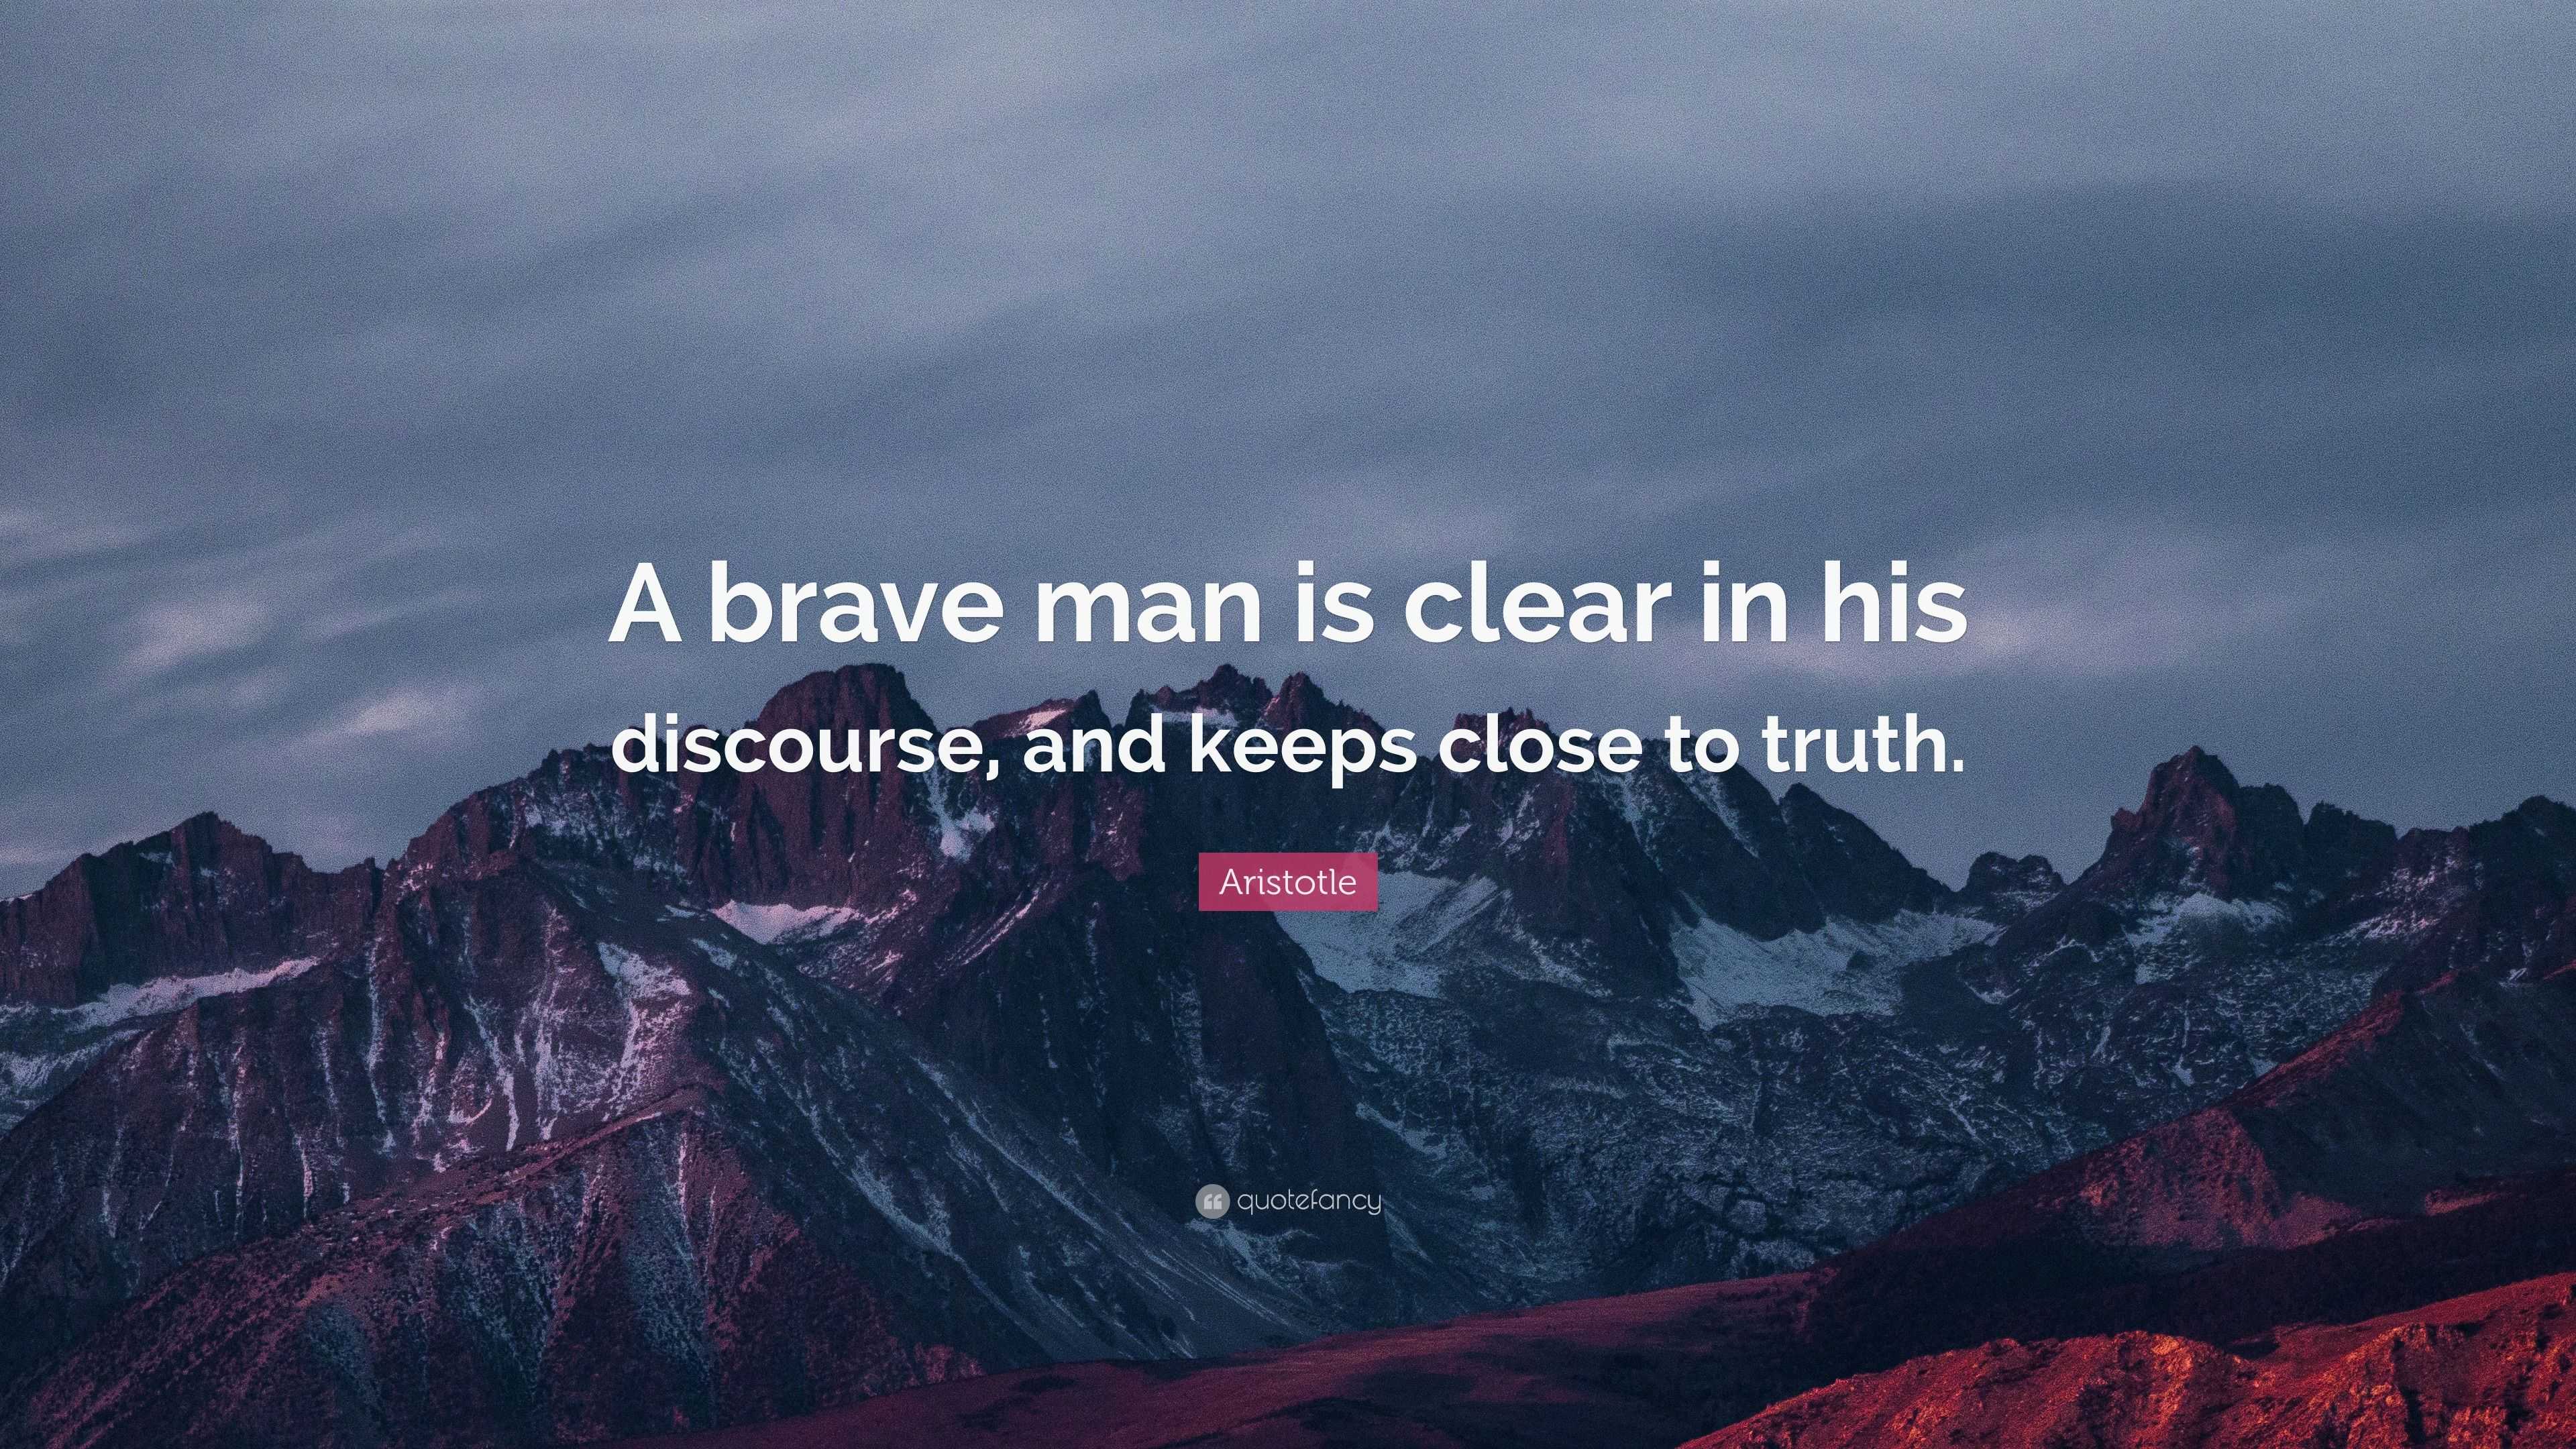 Aristotle Quote: "A brave man is clear in his discourse ...